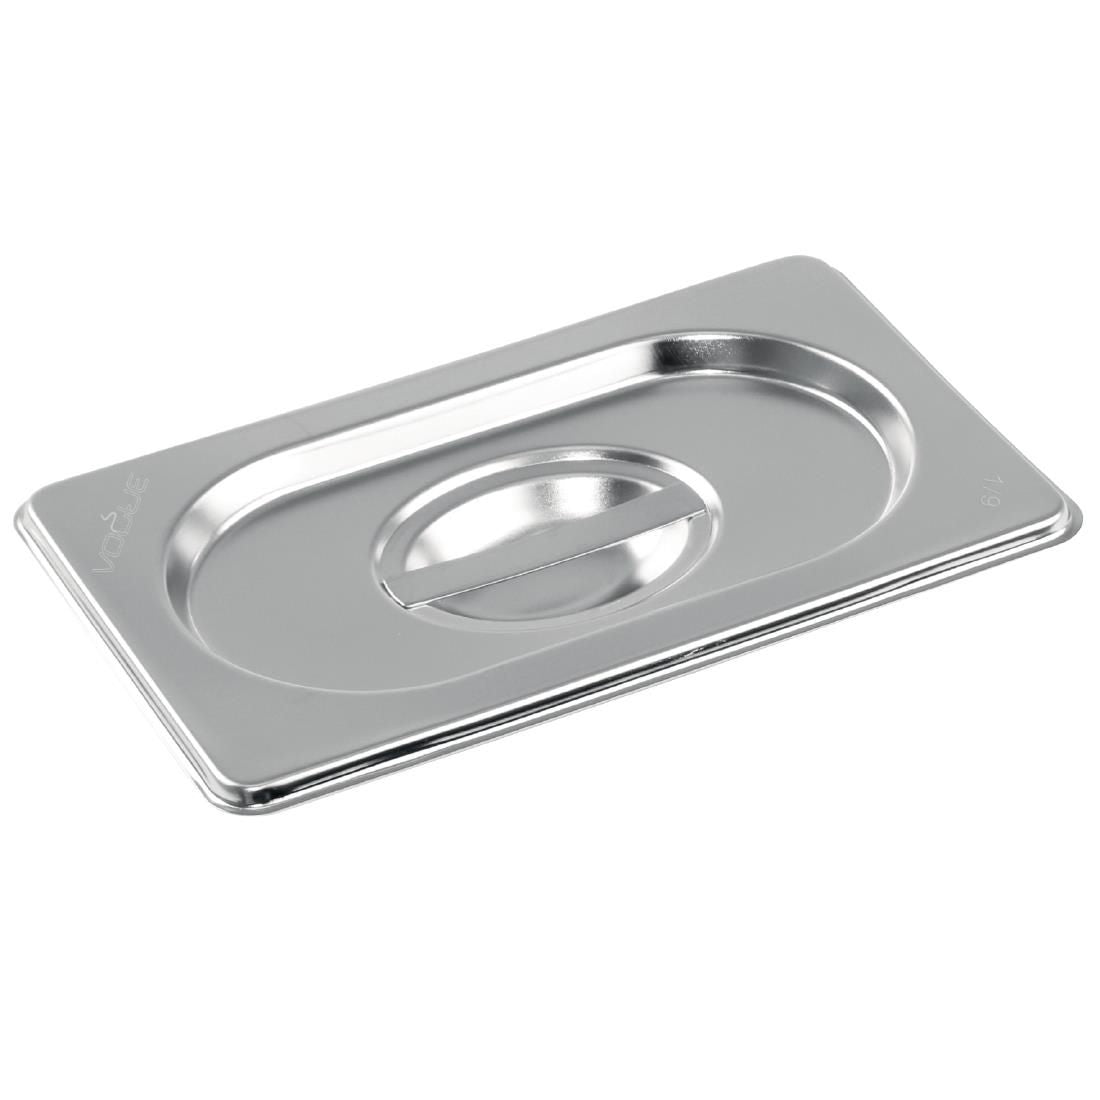 K997 Vogue Stainless Steel 1/9 Gastronorm Lid